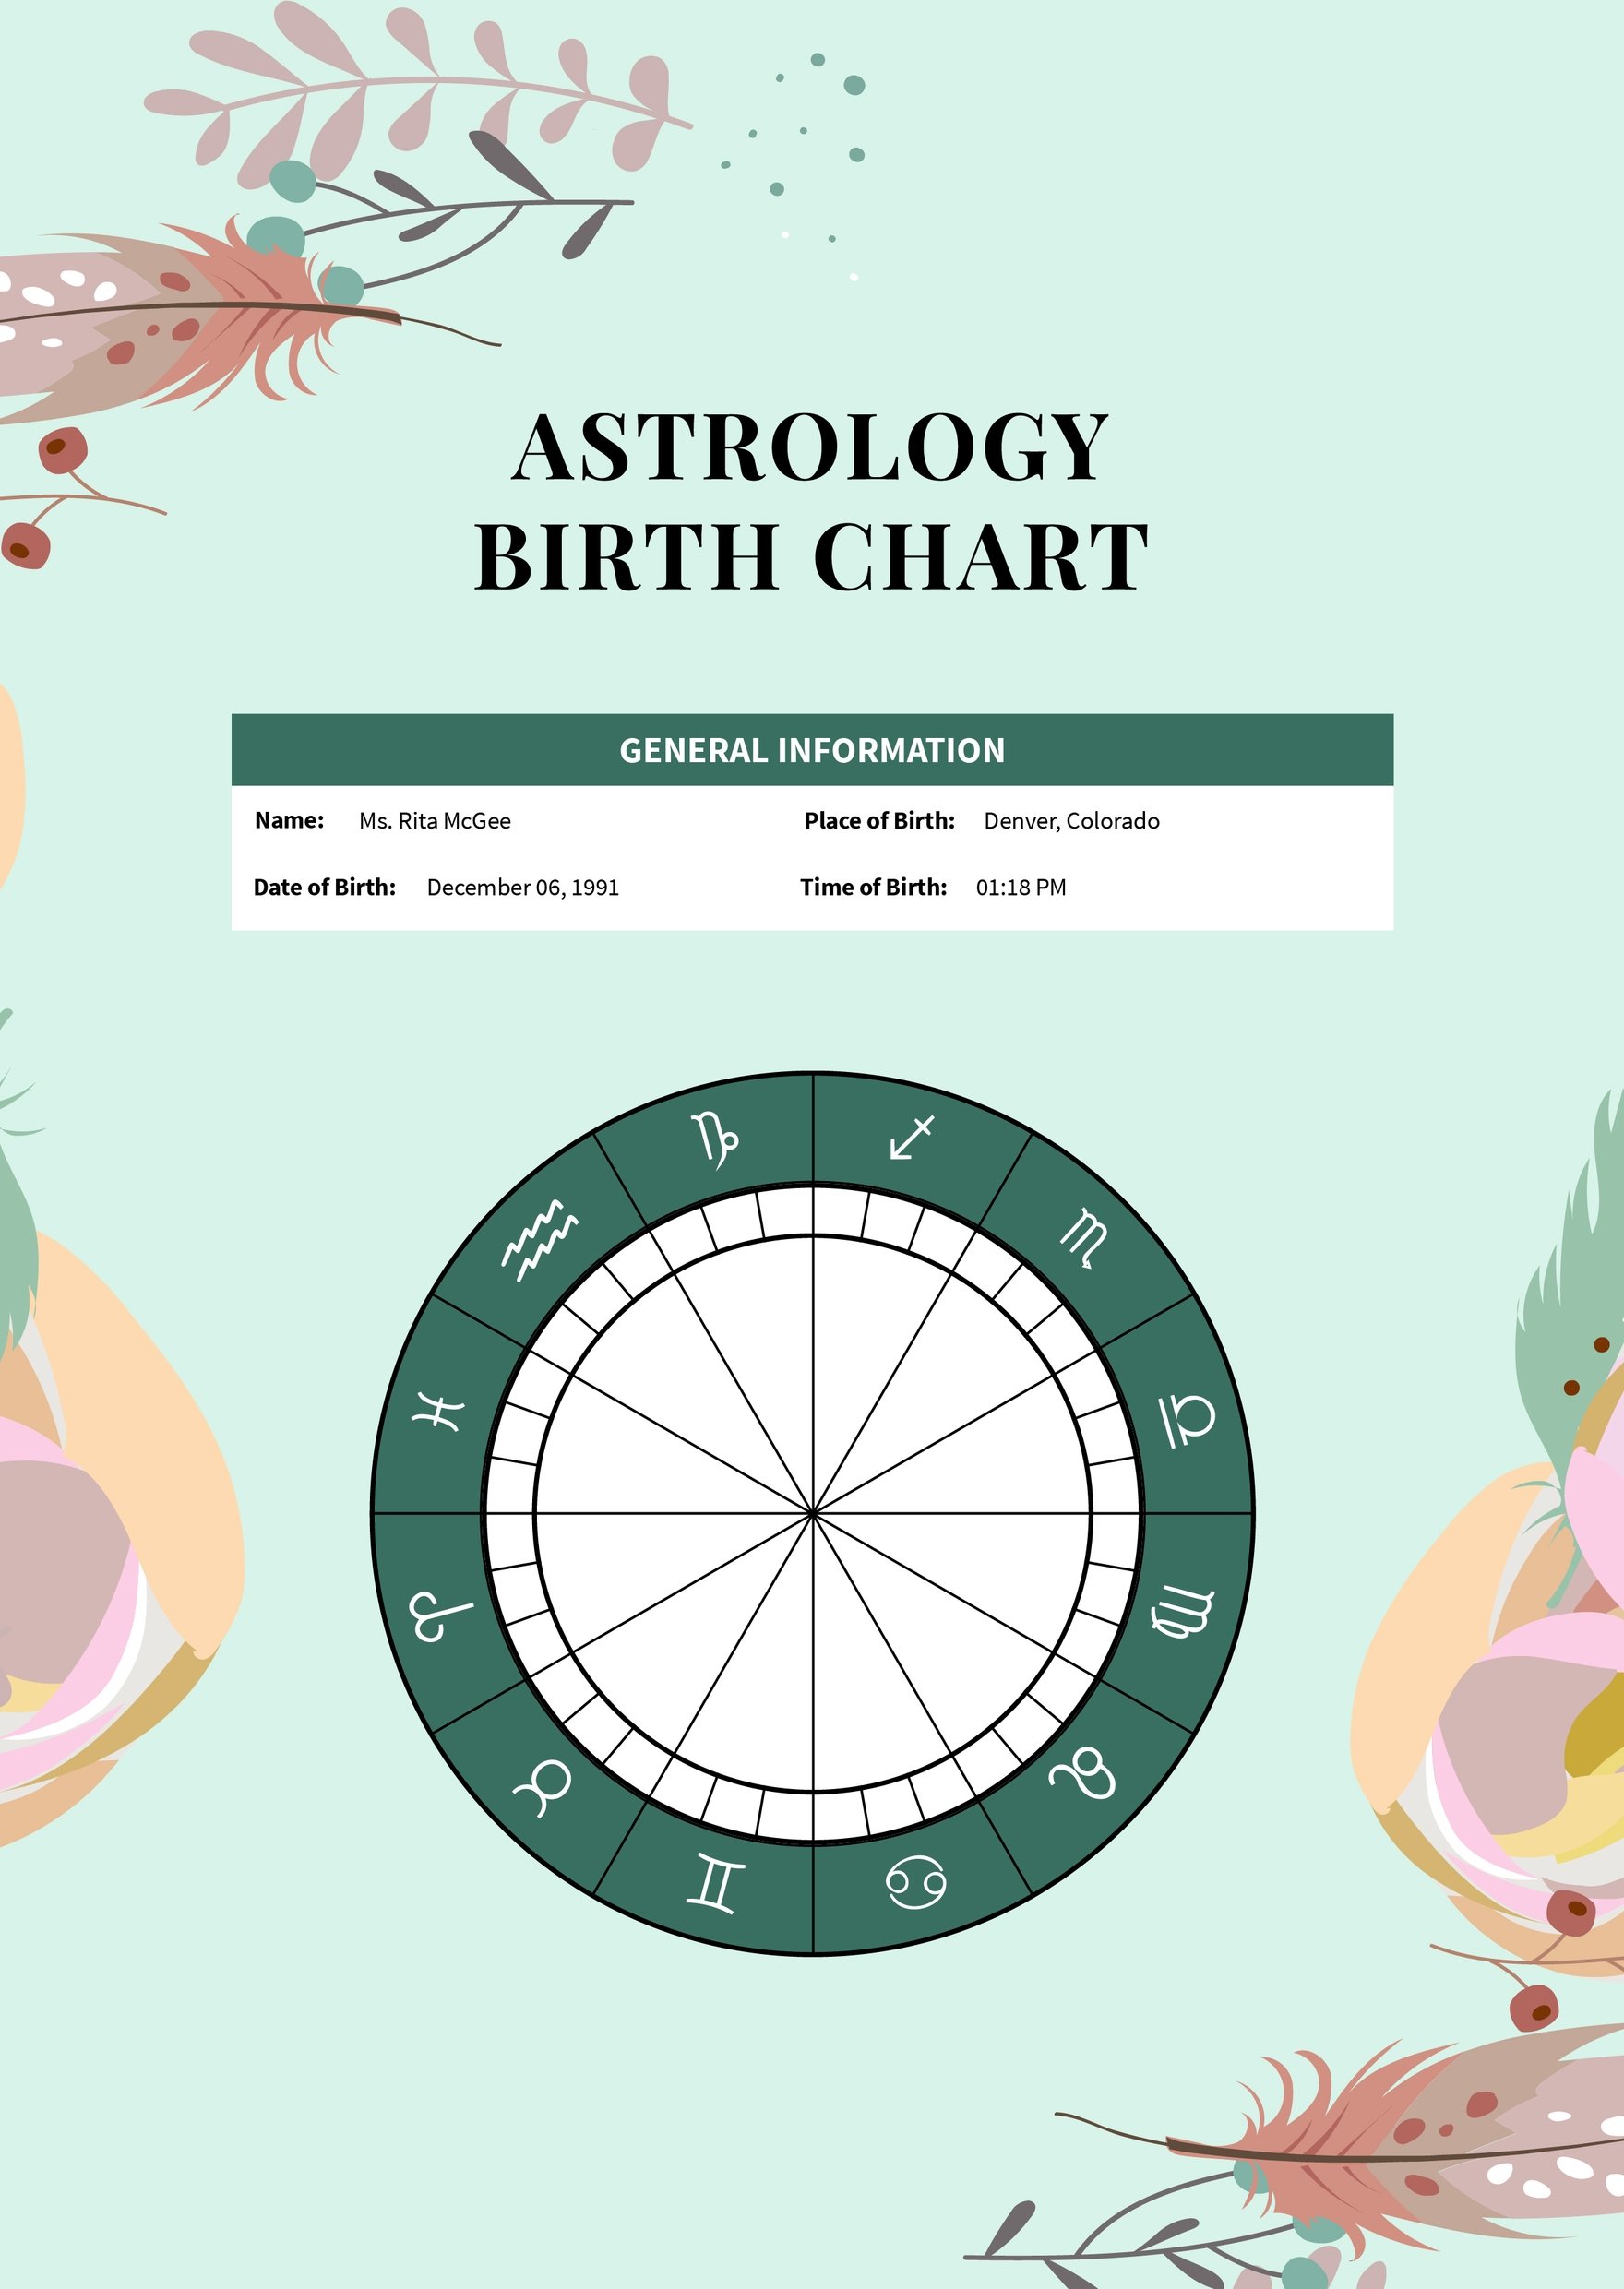 Astrology Birth Chart Template in Illustrator, PDF Download